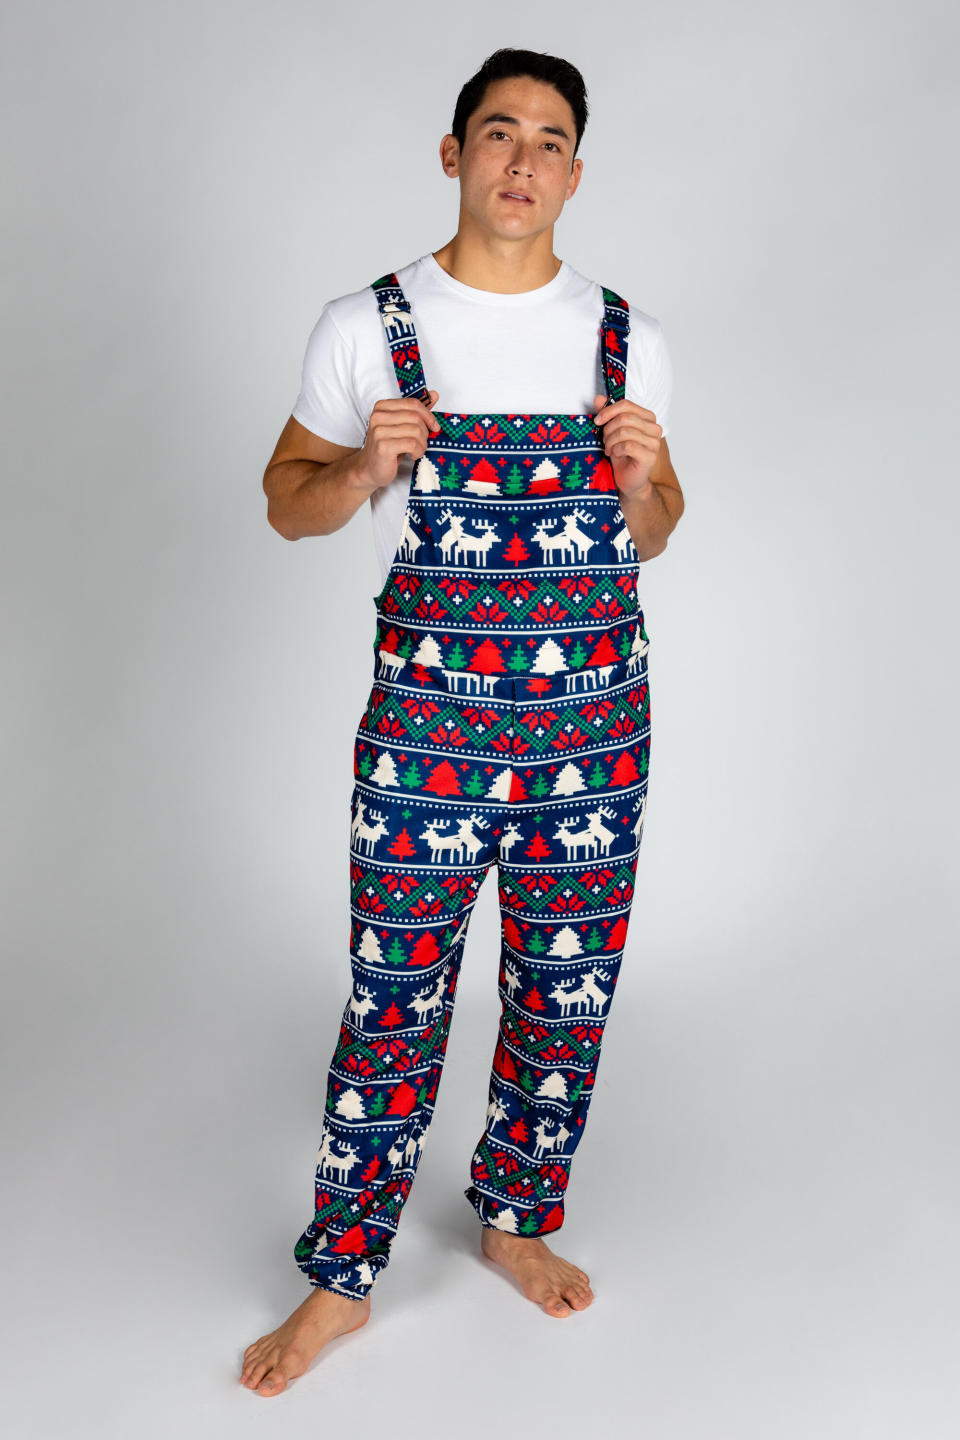 Ugly holiday sweaters had their day, but there are other kinds of equally ugly festive apparel. I give you ... &lt;a href=&quot;https://www.shinesty.com/products/the-caribou-lous-mens-christmas-pajamaralls&quot; target=&quot;_blank&quot; rel=&quot;noopener noreferrer&quot;&gt;the pajamarall.&lt;/a&gt;